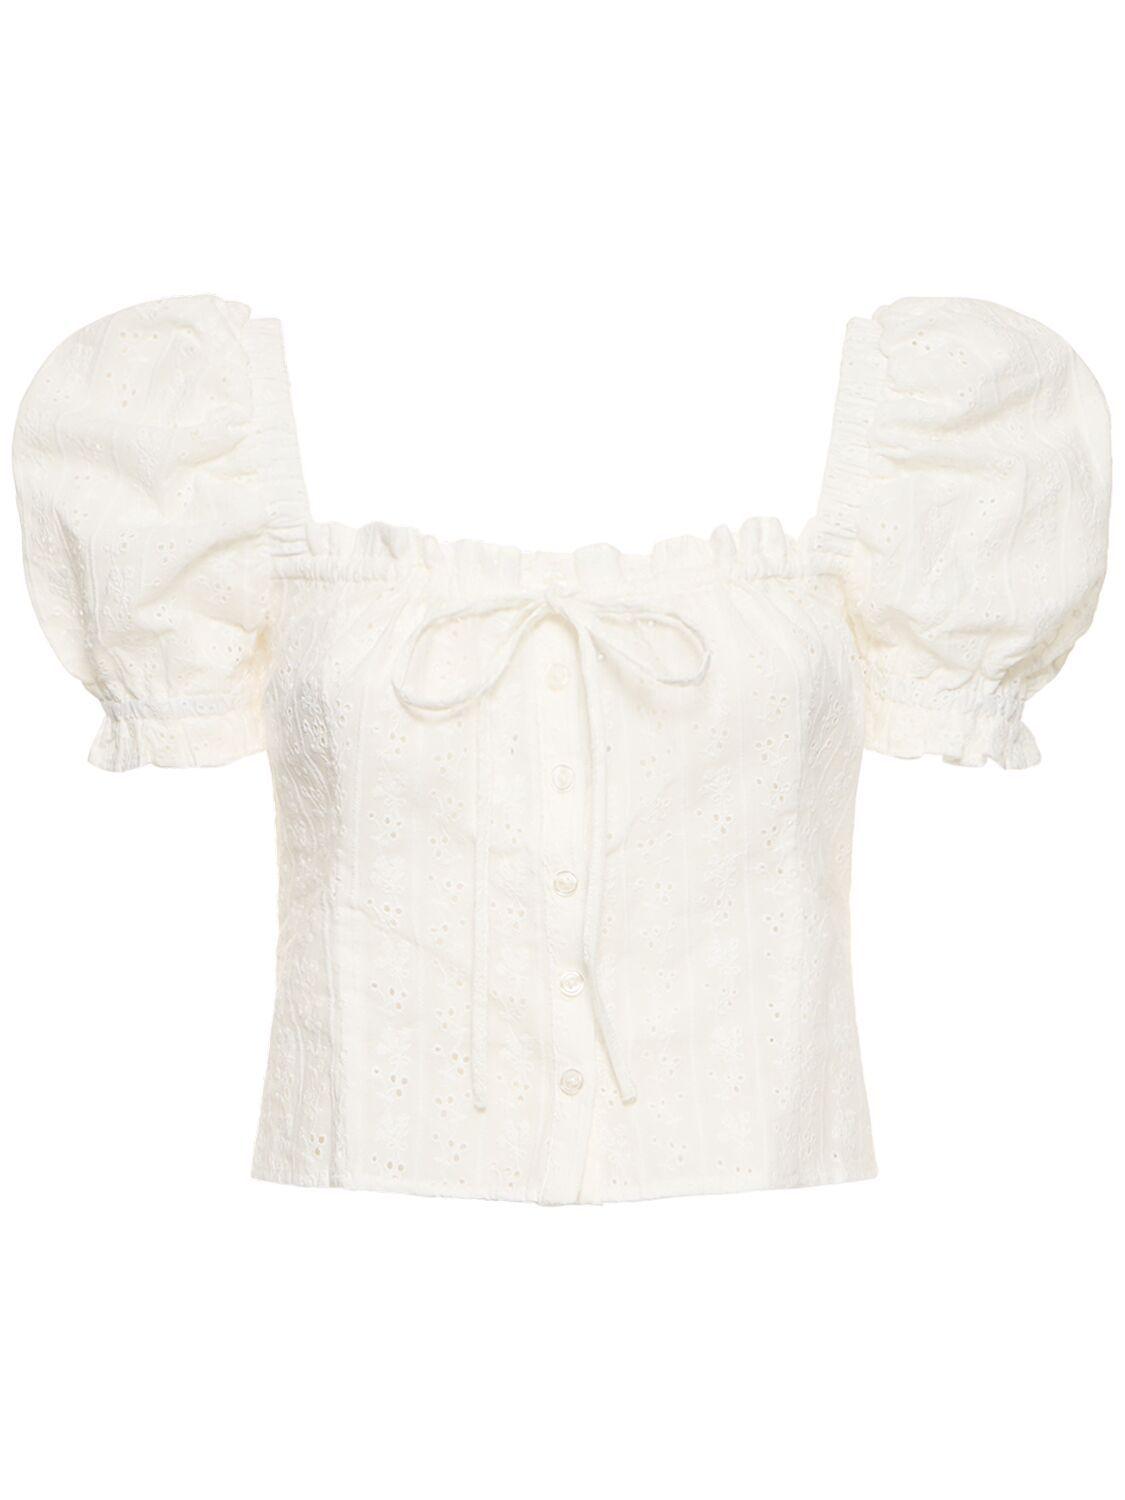 We Wore What Cotton Eyelet Lace Puff Sleeve Top in White | Lyst